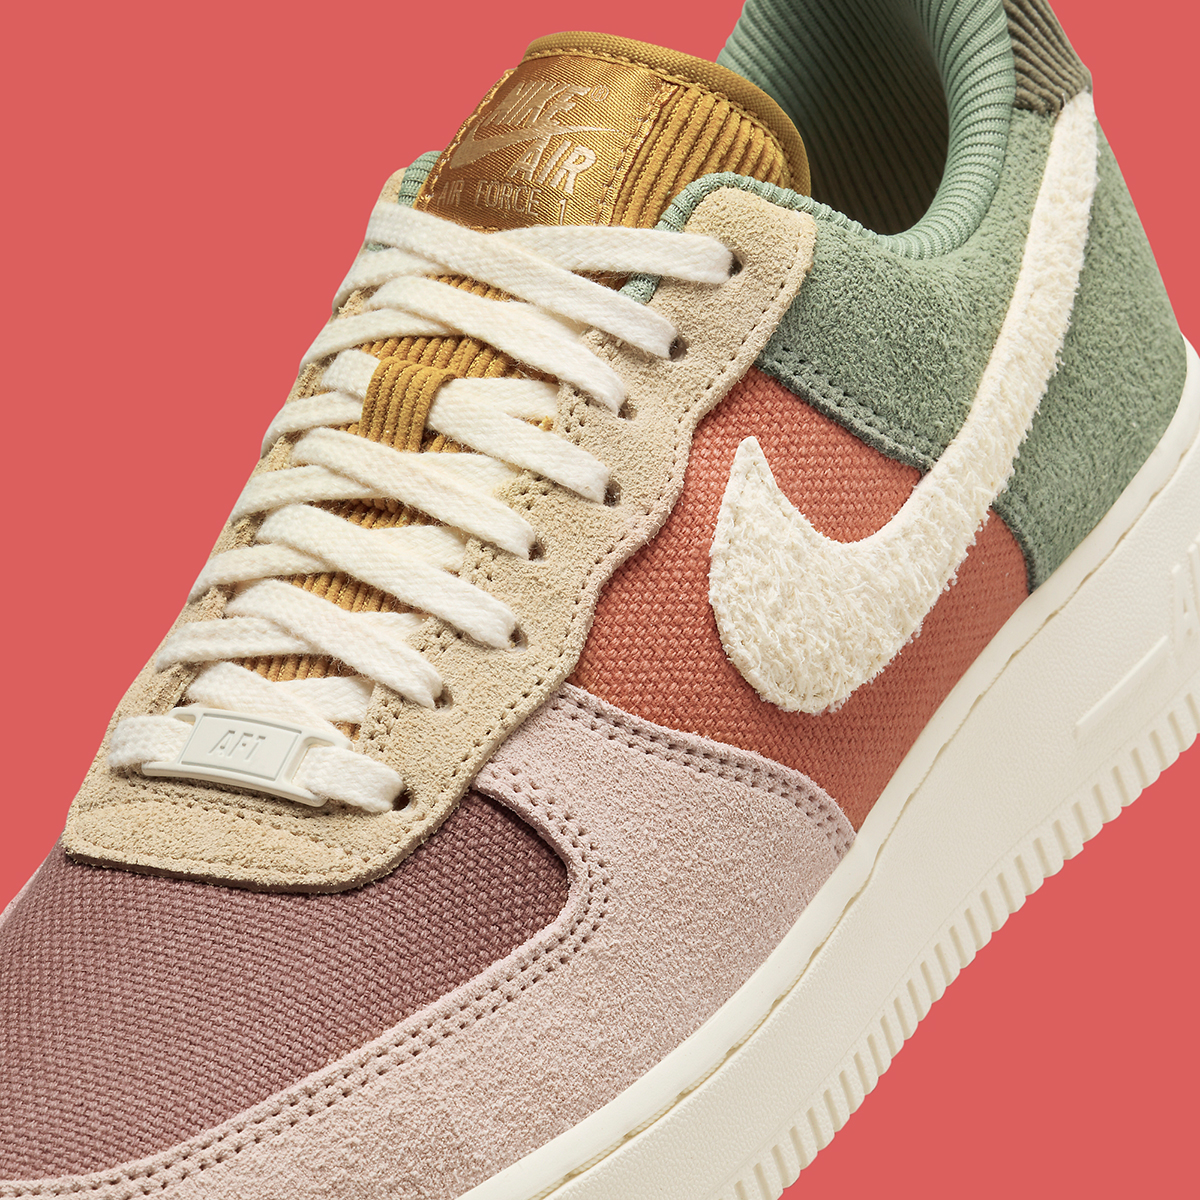 peep a first look at the union la x collection nike cortez khaki red Oil Green Pale Ivory Fz3782 386 6